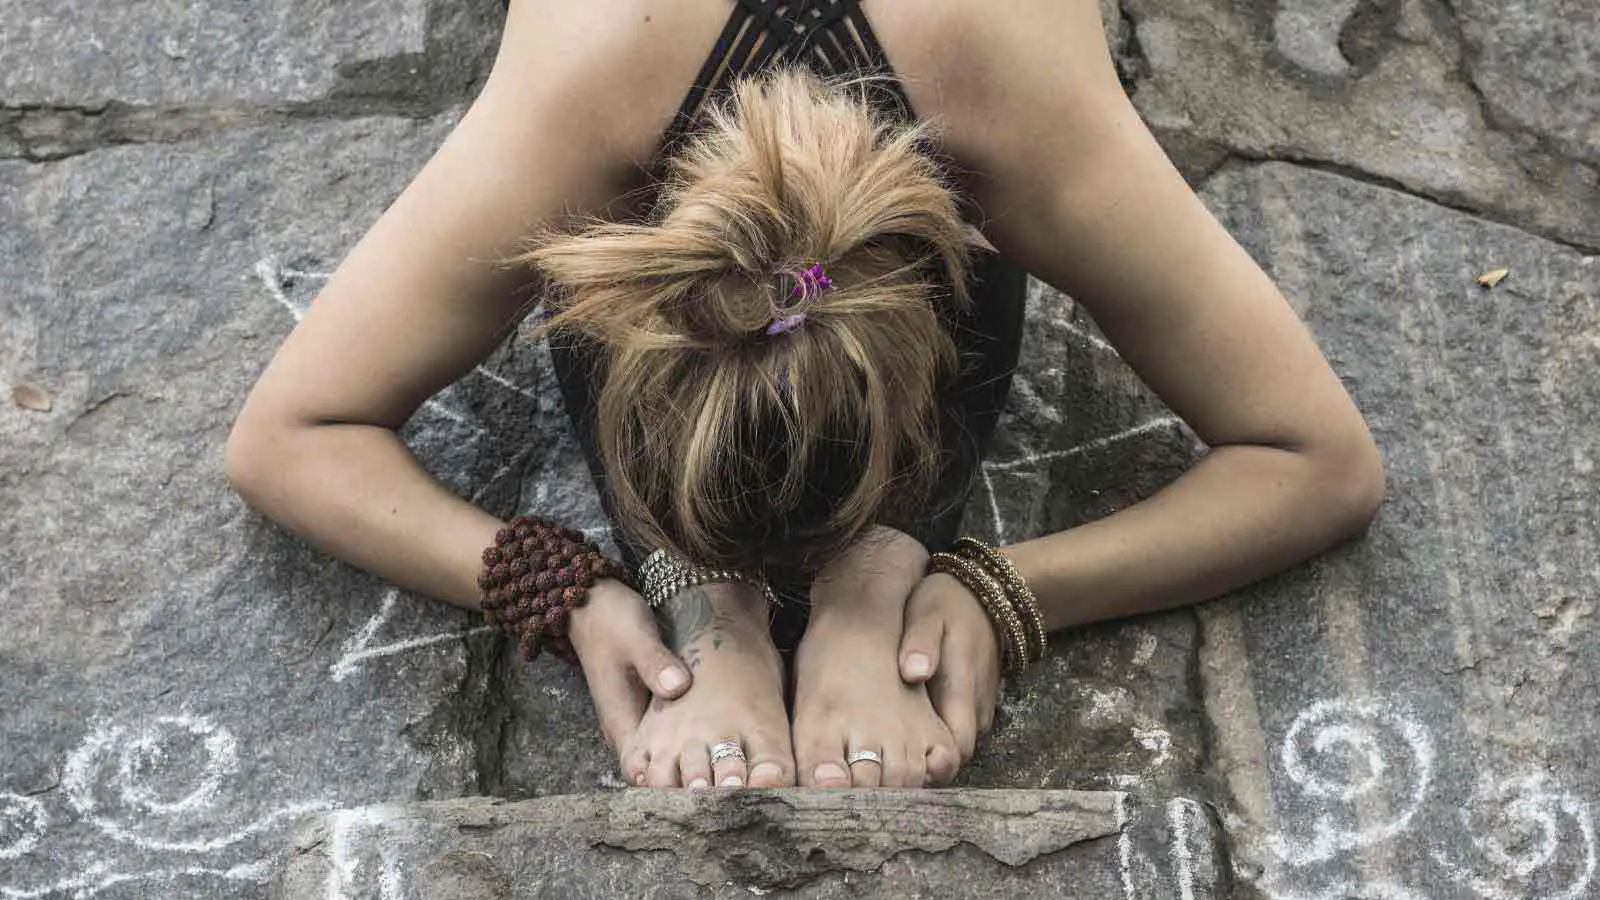 Before yoga: 7 Things You Should Not Do Before your Yoga Practice